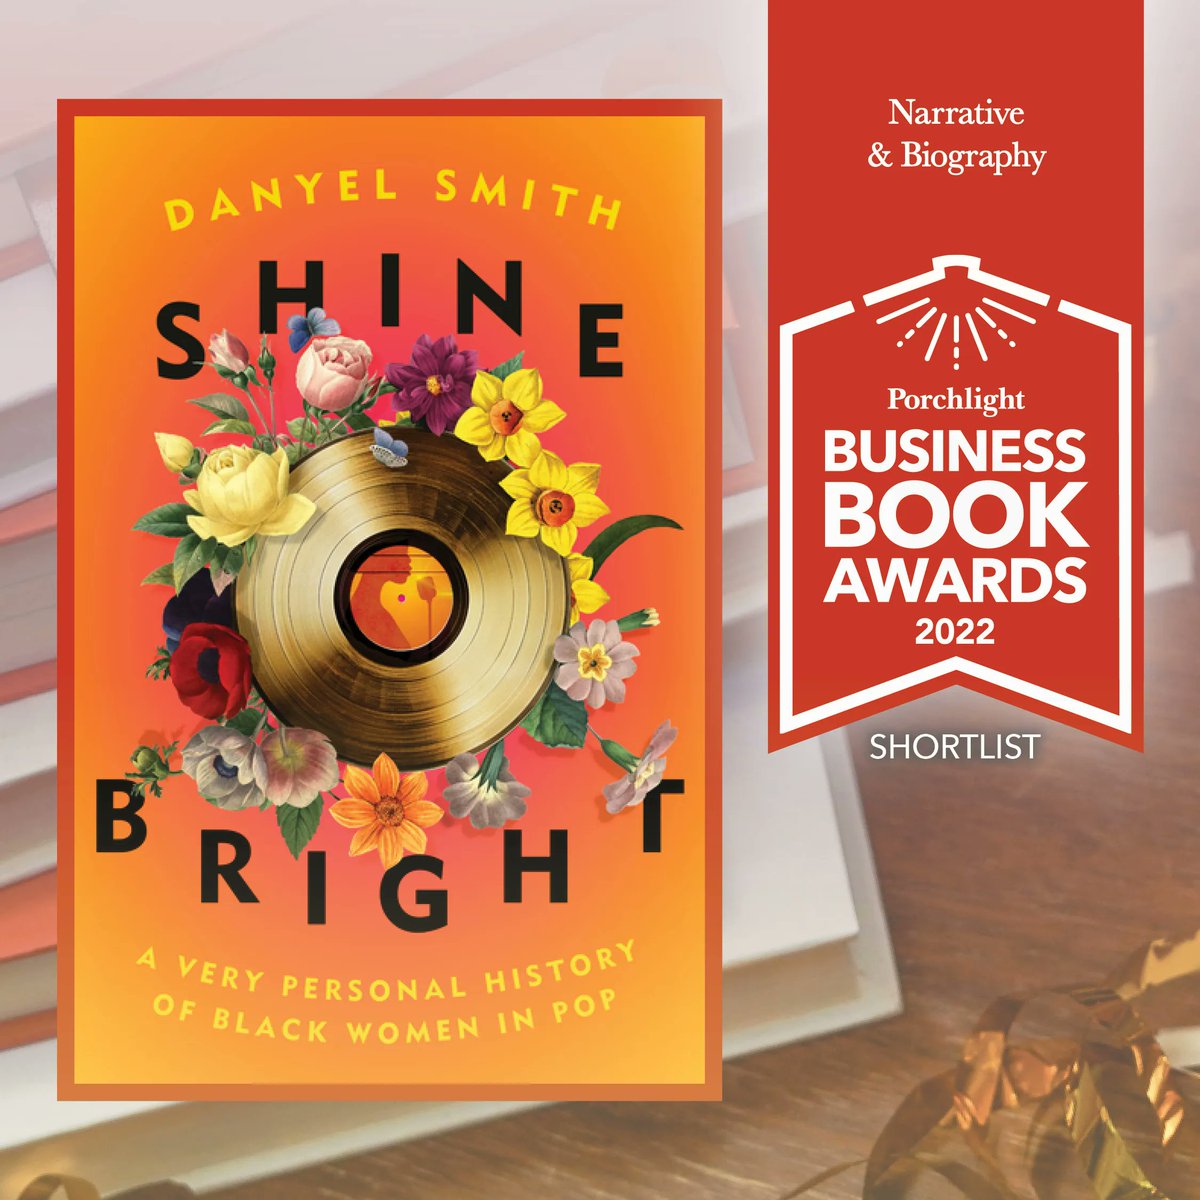 The 2022 Narrative & Biography book of the year is SHINE BRIGHT by @danamo, published by @roclit101

Head to our website to read an excerpt  → bit.ly/plbba22sb

 #PLBBA22 #PorchlightBookCompany #WeBelieveInBooks